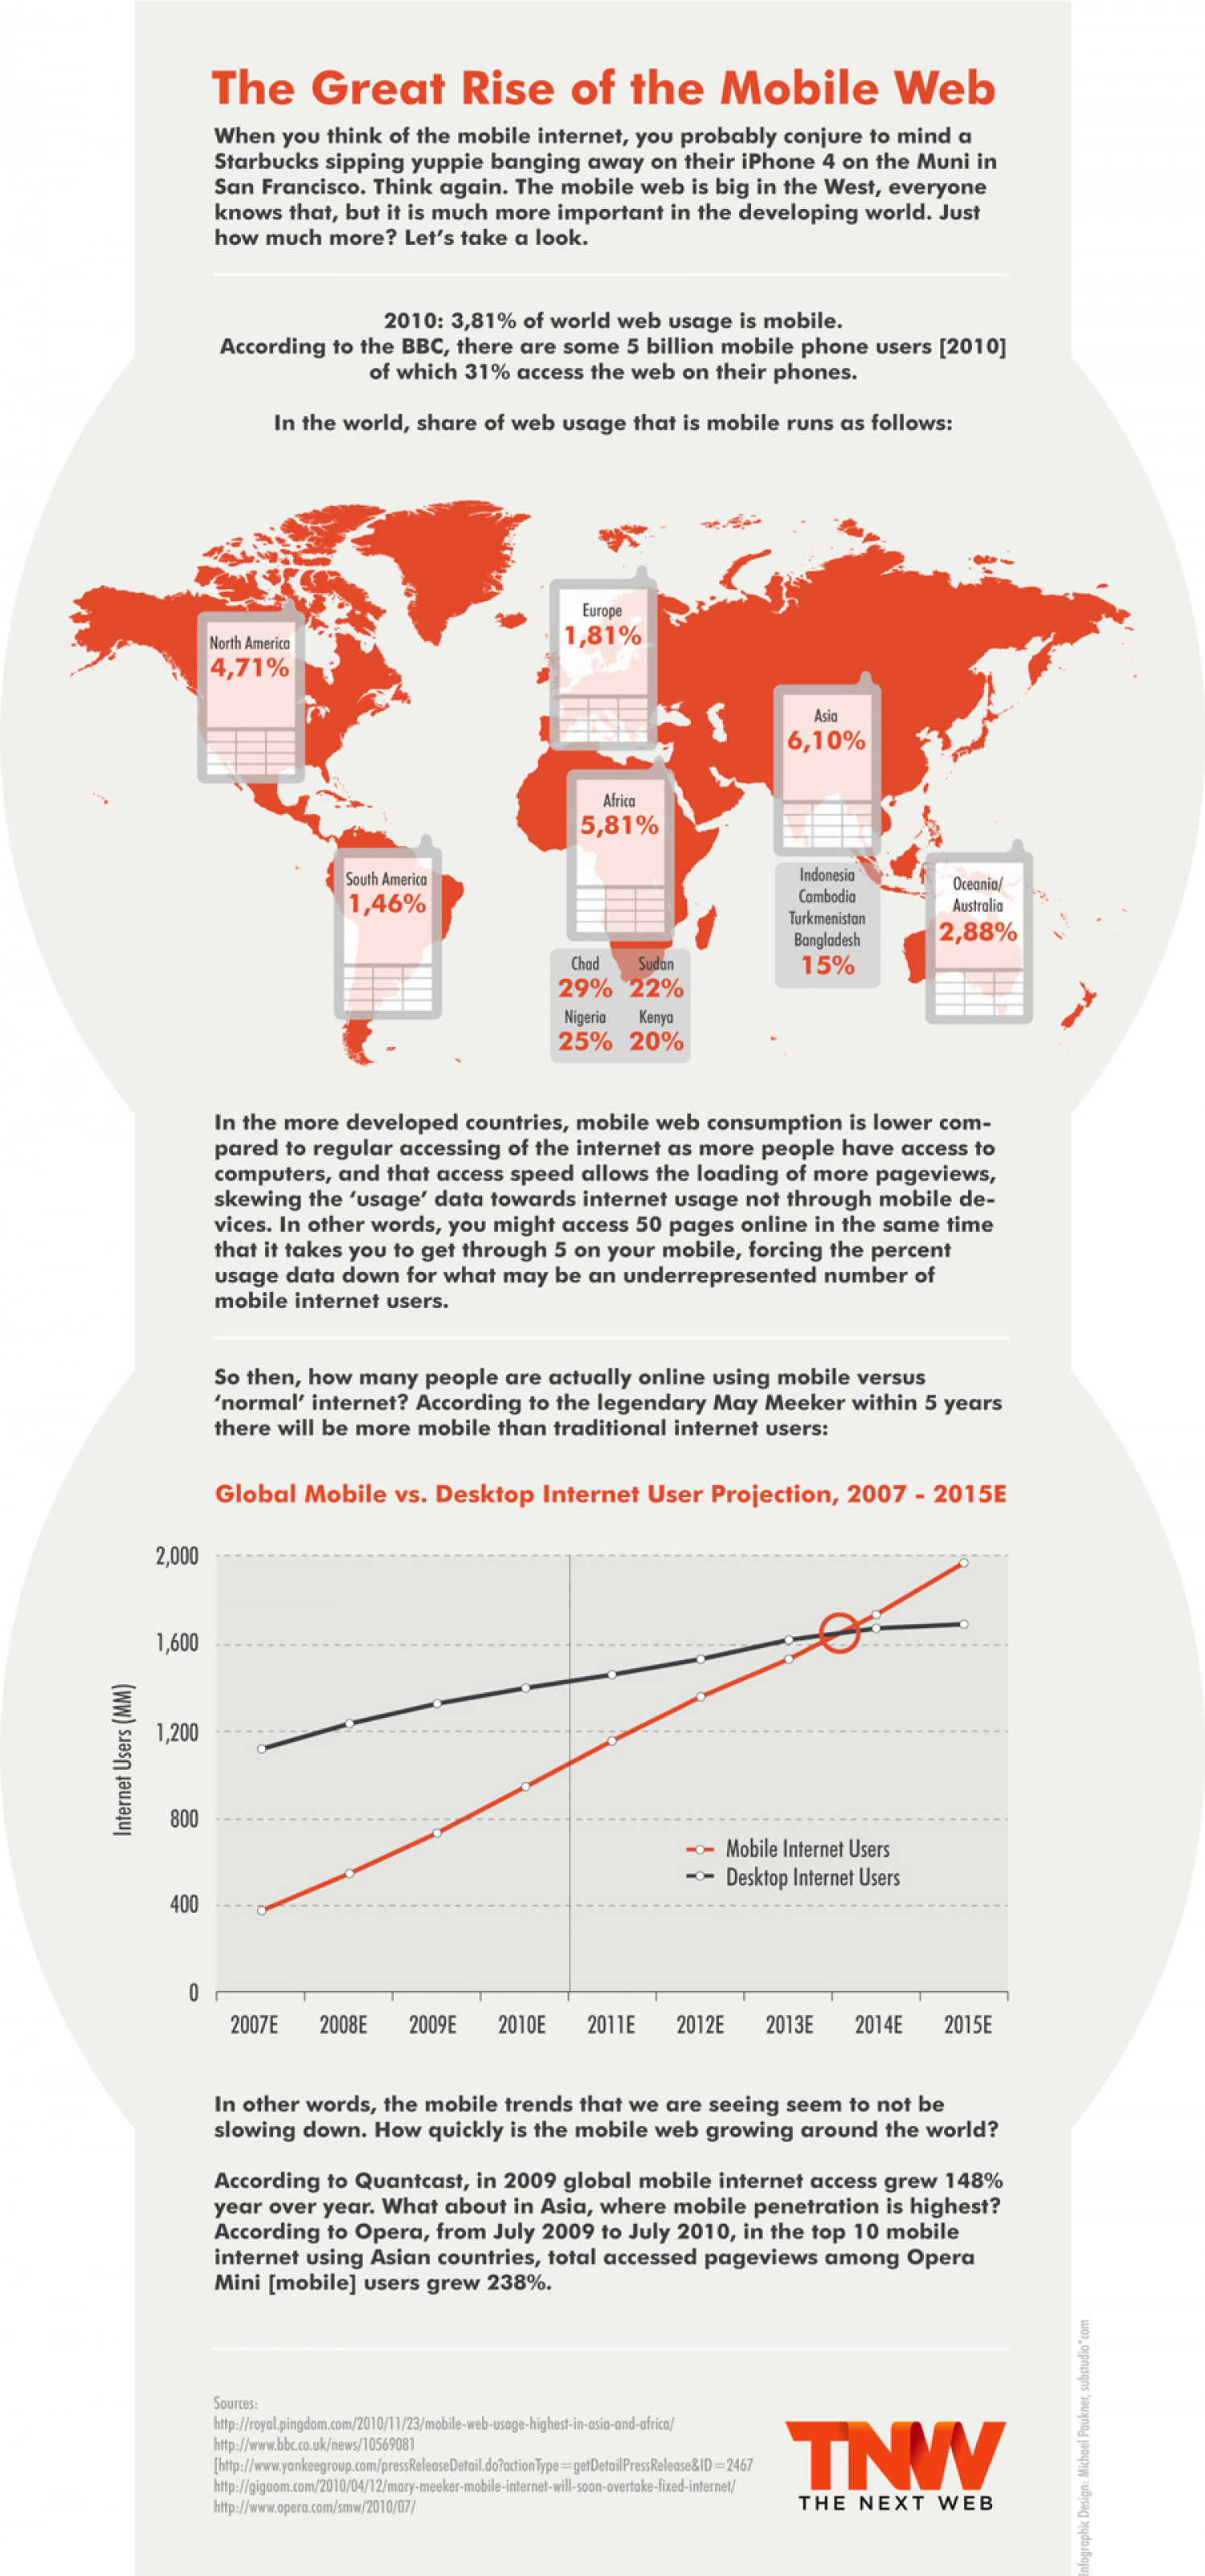 The Mobile Web in the Rest of the World Infographic